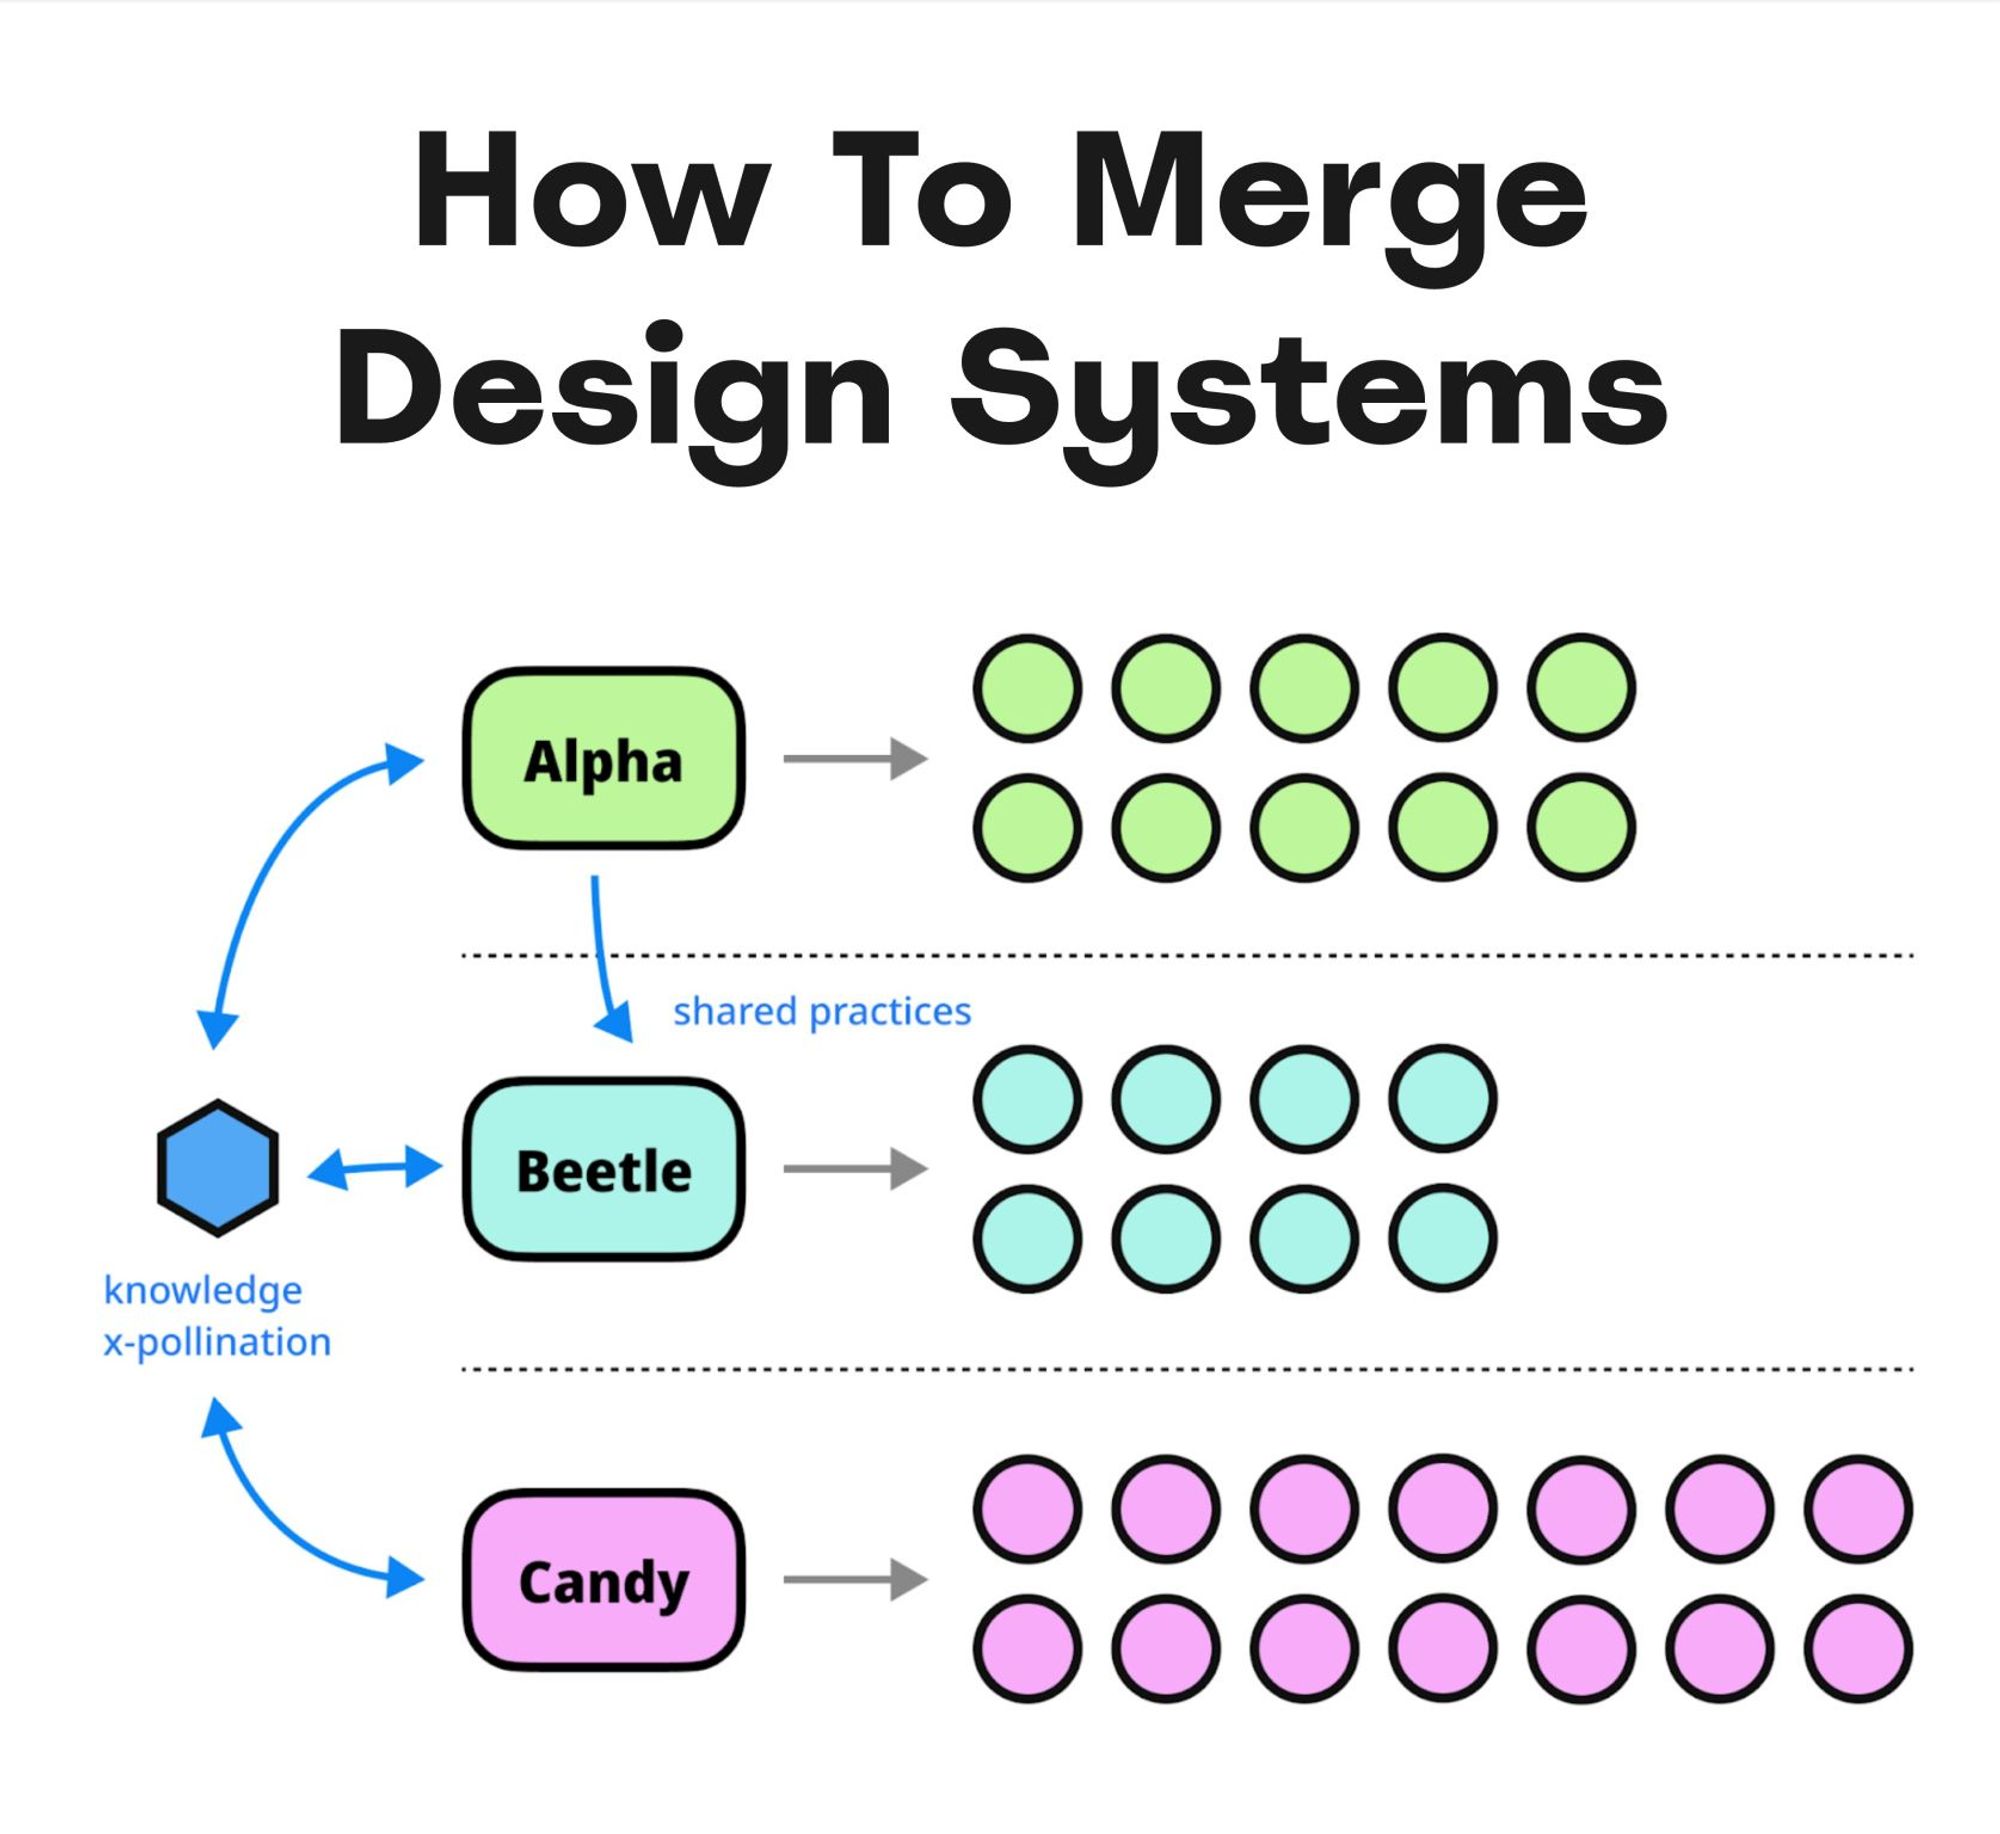 How To Merge Design Systems by Vitaly Friedman